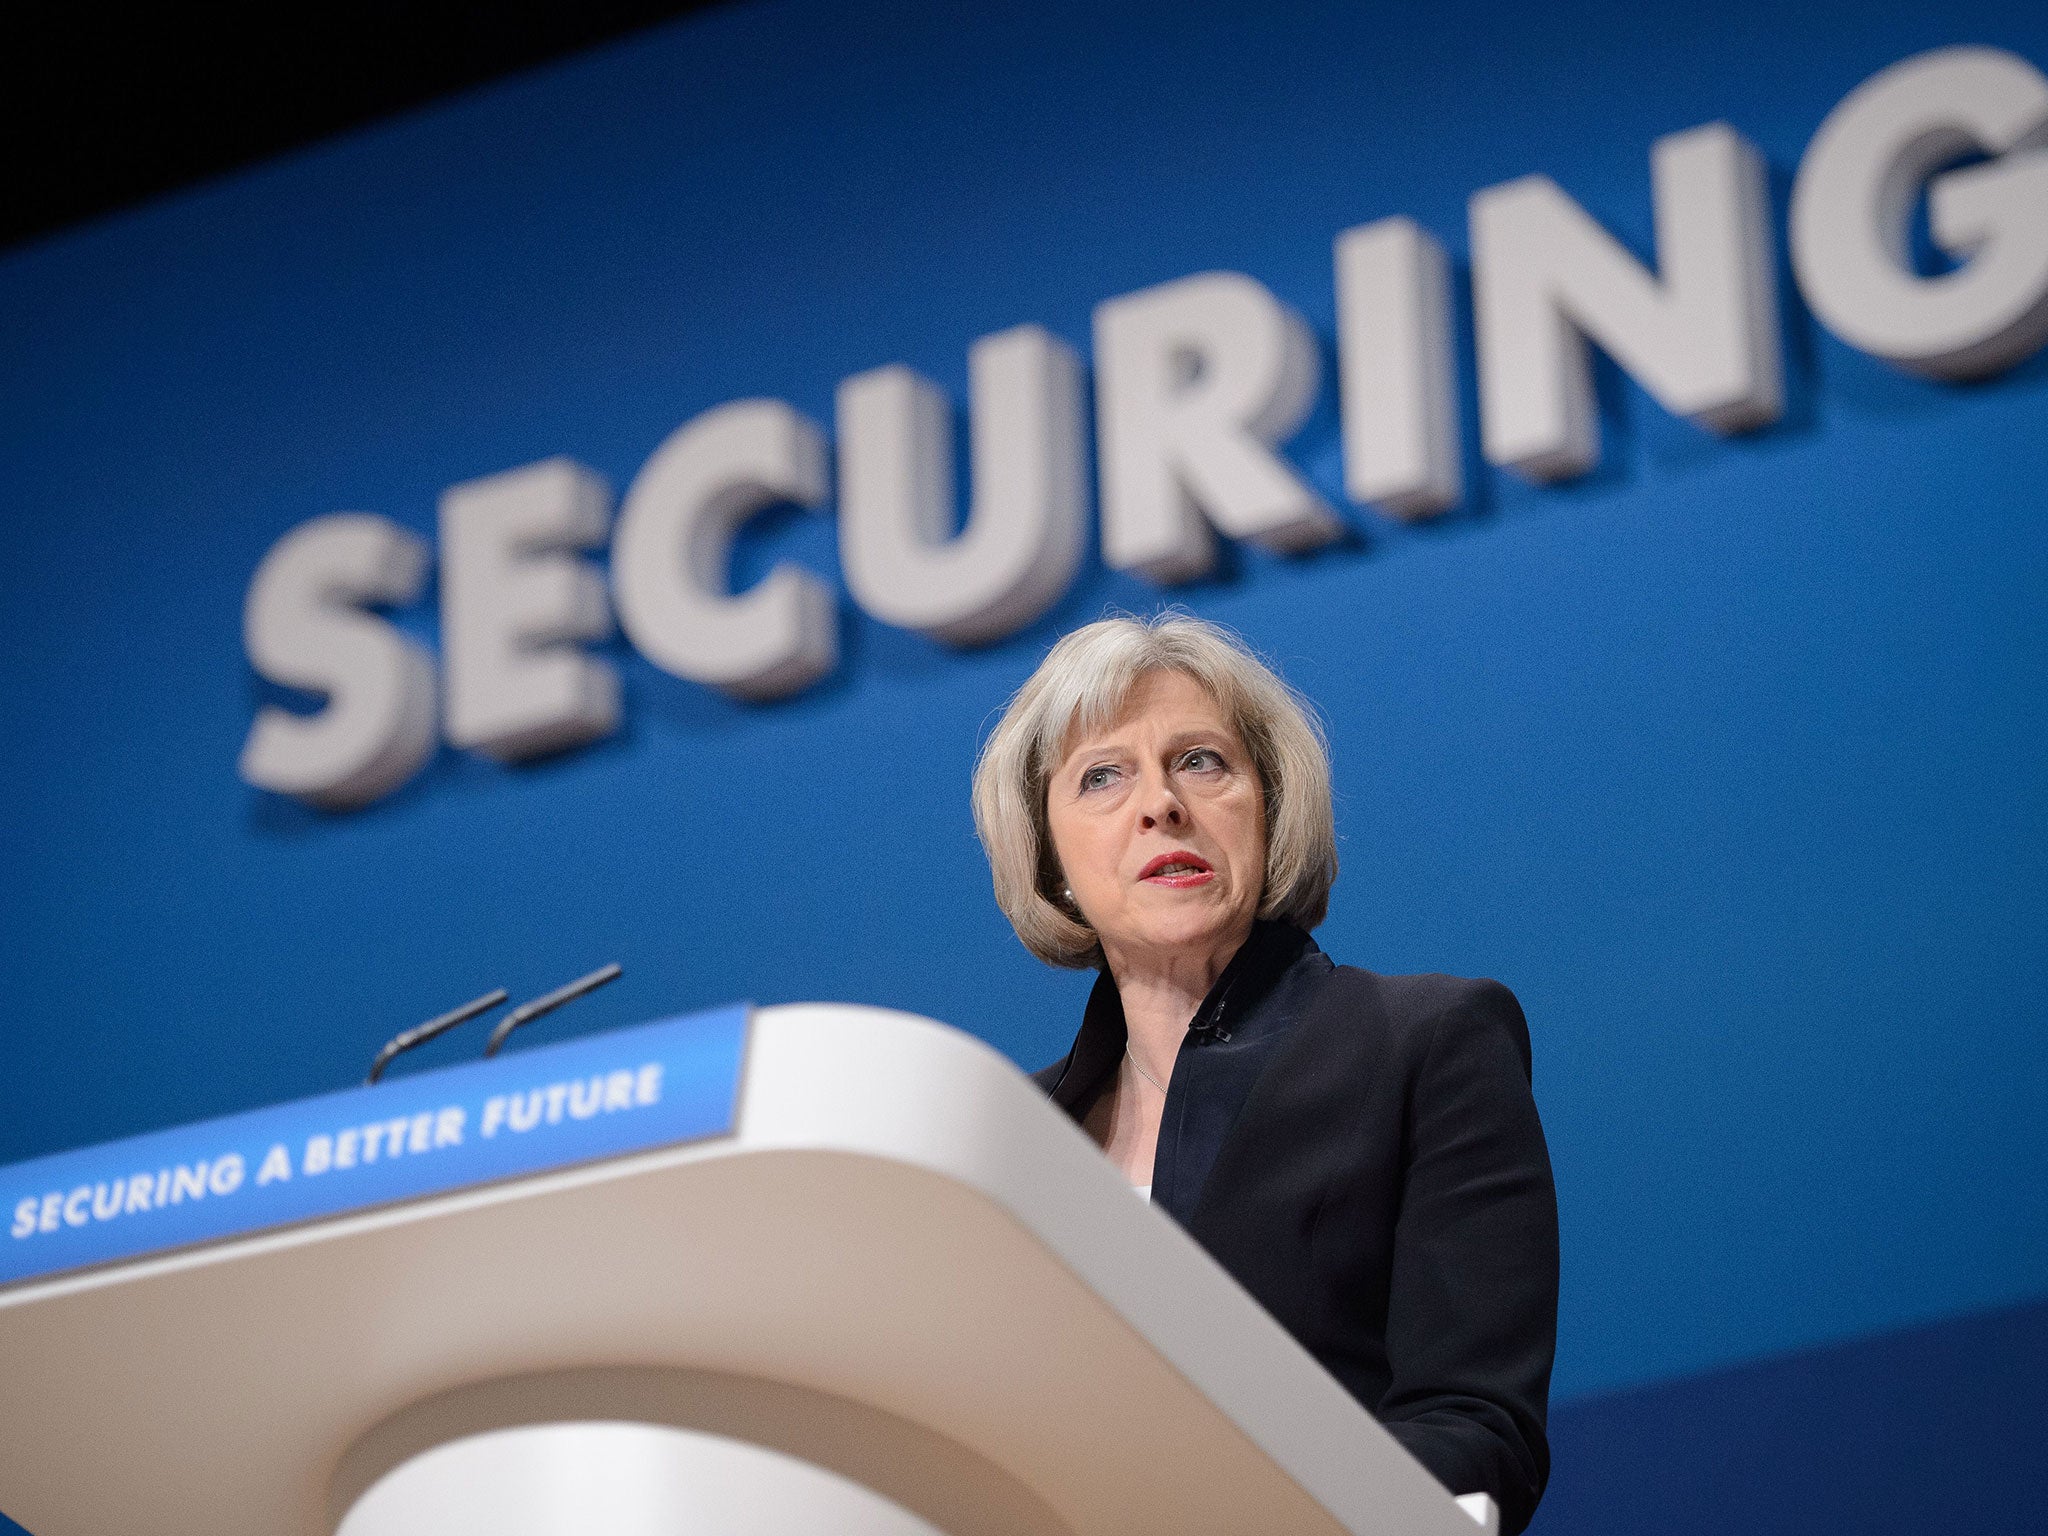 The Home Secretary outlined plans for a new law that threatened schools and universities with legal action if they failed to address child radicalisation or ban extremists from preaching on campus